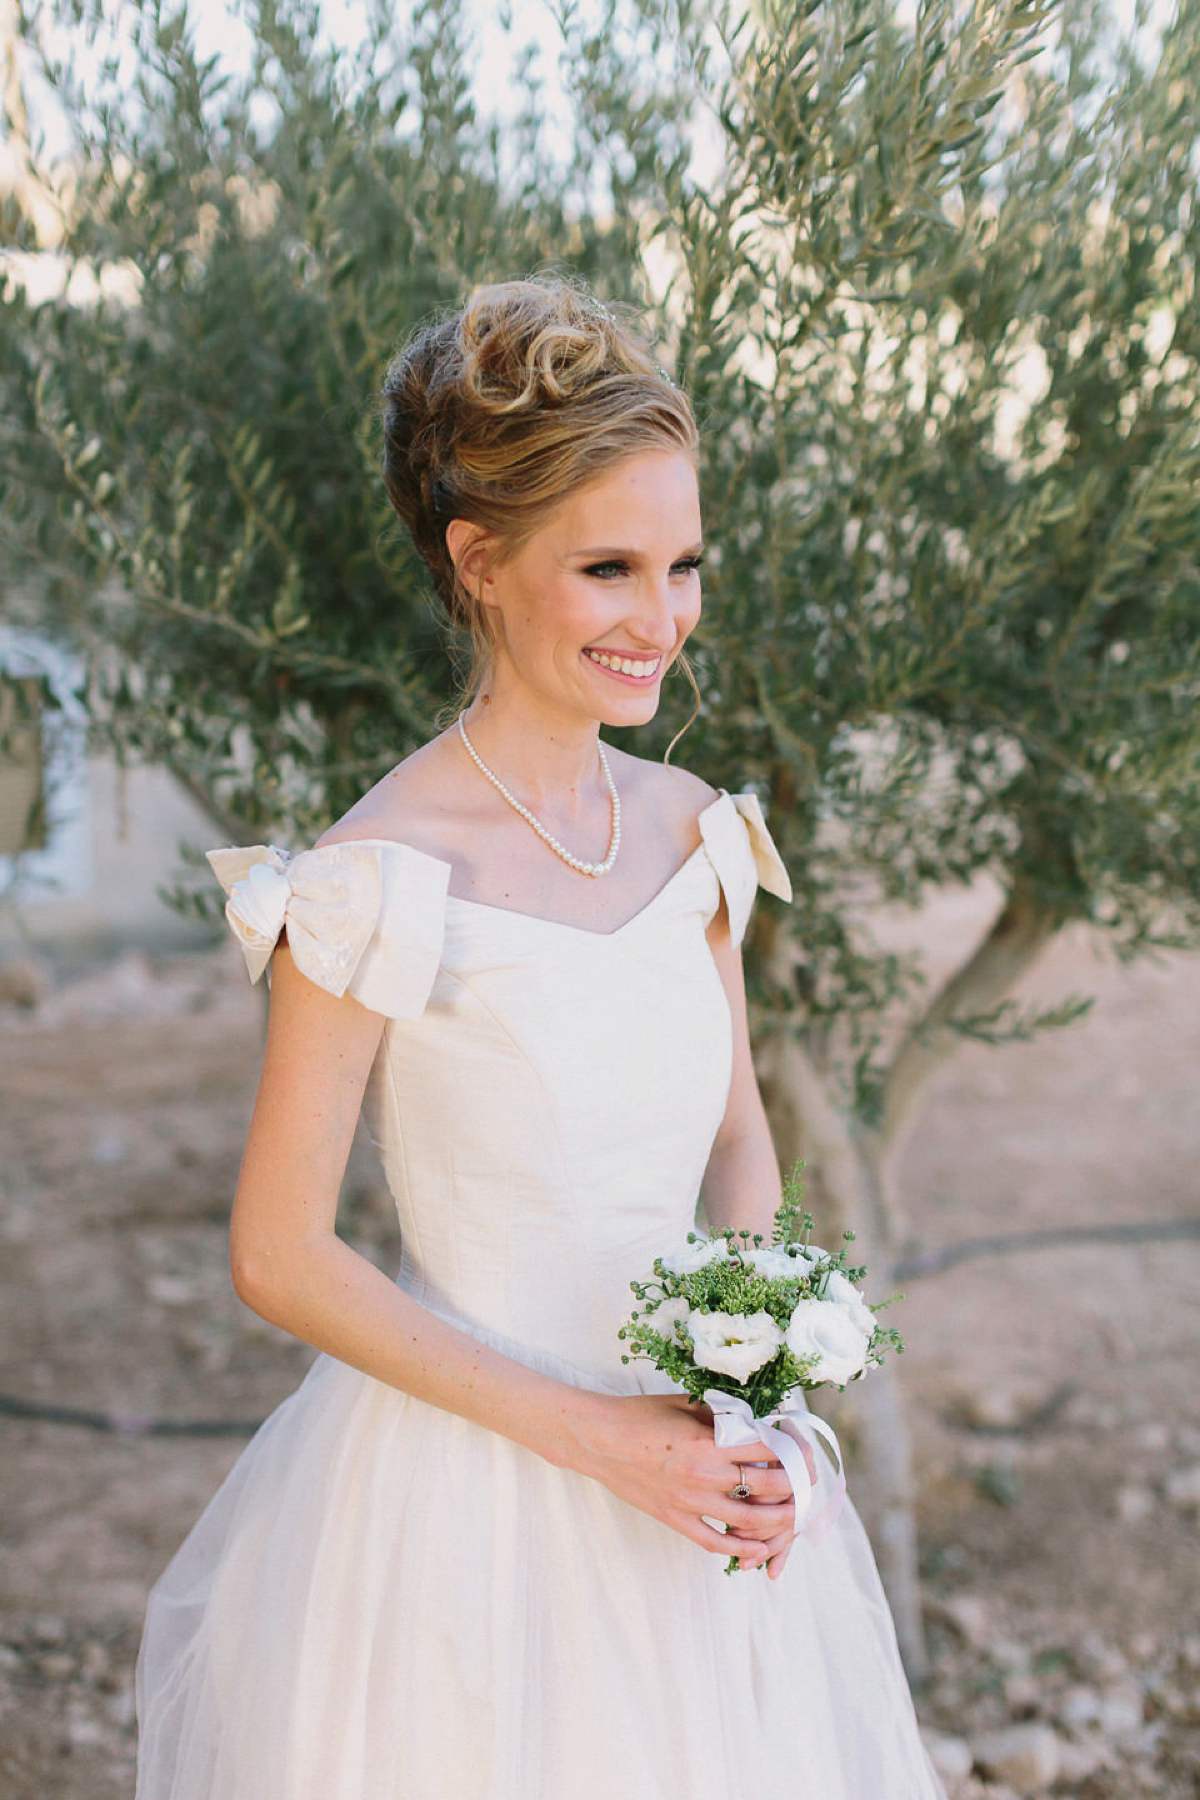 Bride Noga wore a vintage wedding dress for her modern festival wedding in the desert. Images by Echoes & Wildhearts Photography.